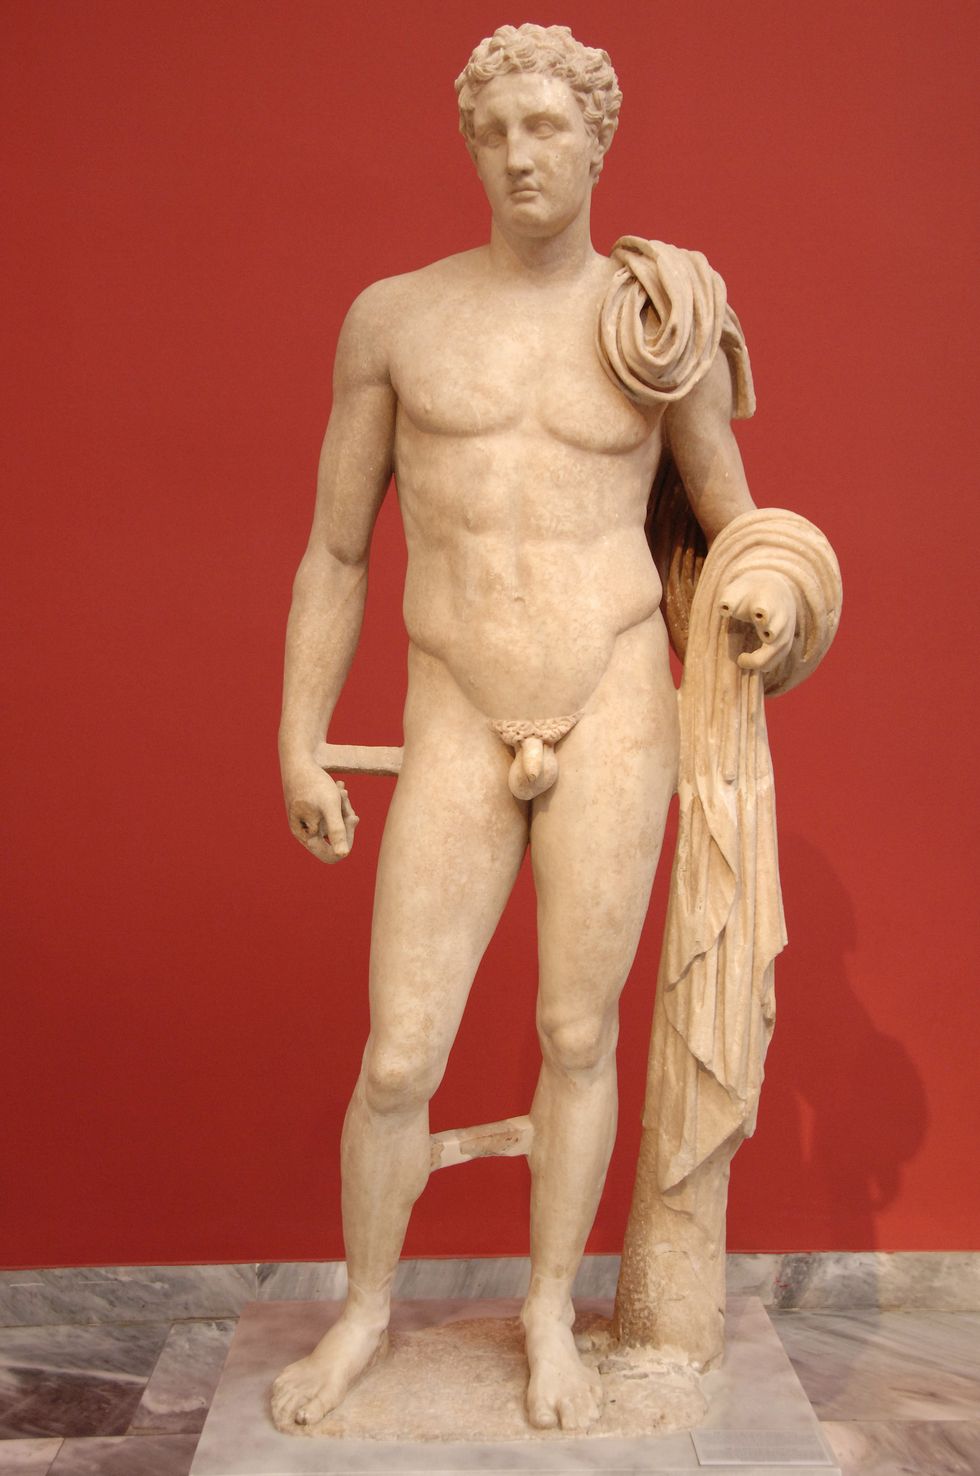 Classical sculpture, Sculpture, Statue, Art, Standing, Ancient history, Chest, Barechested, Human body, Monument, 